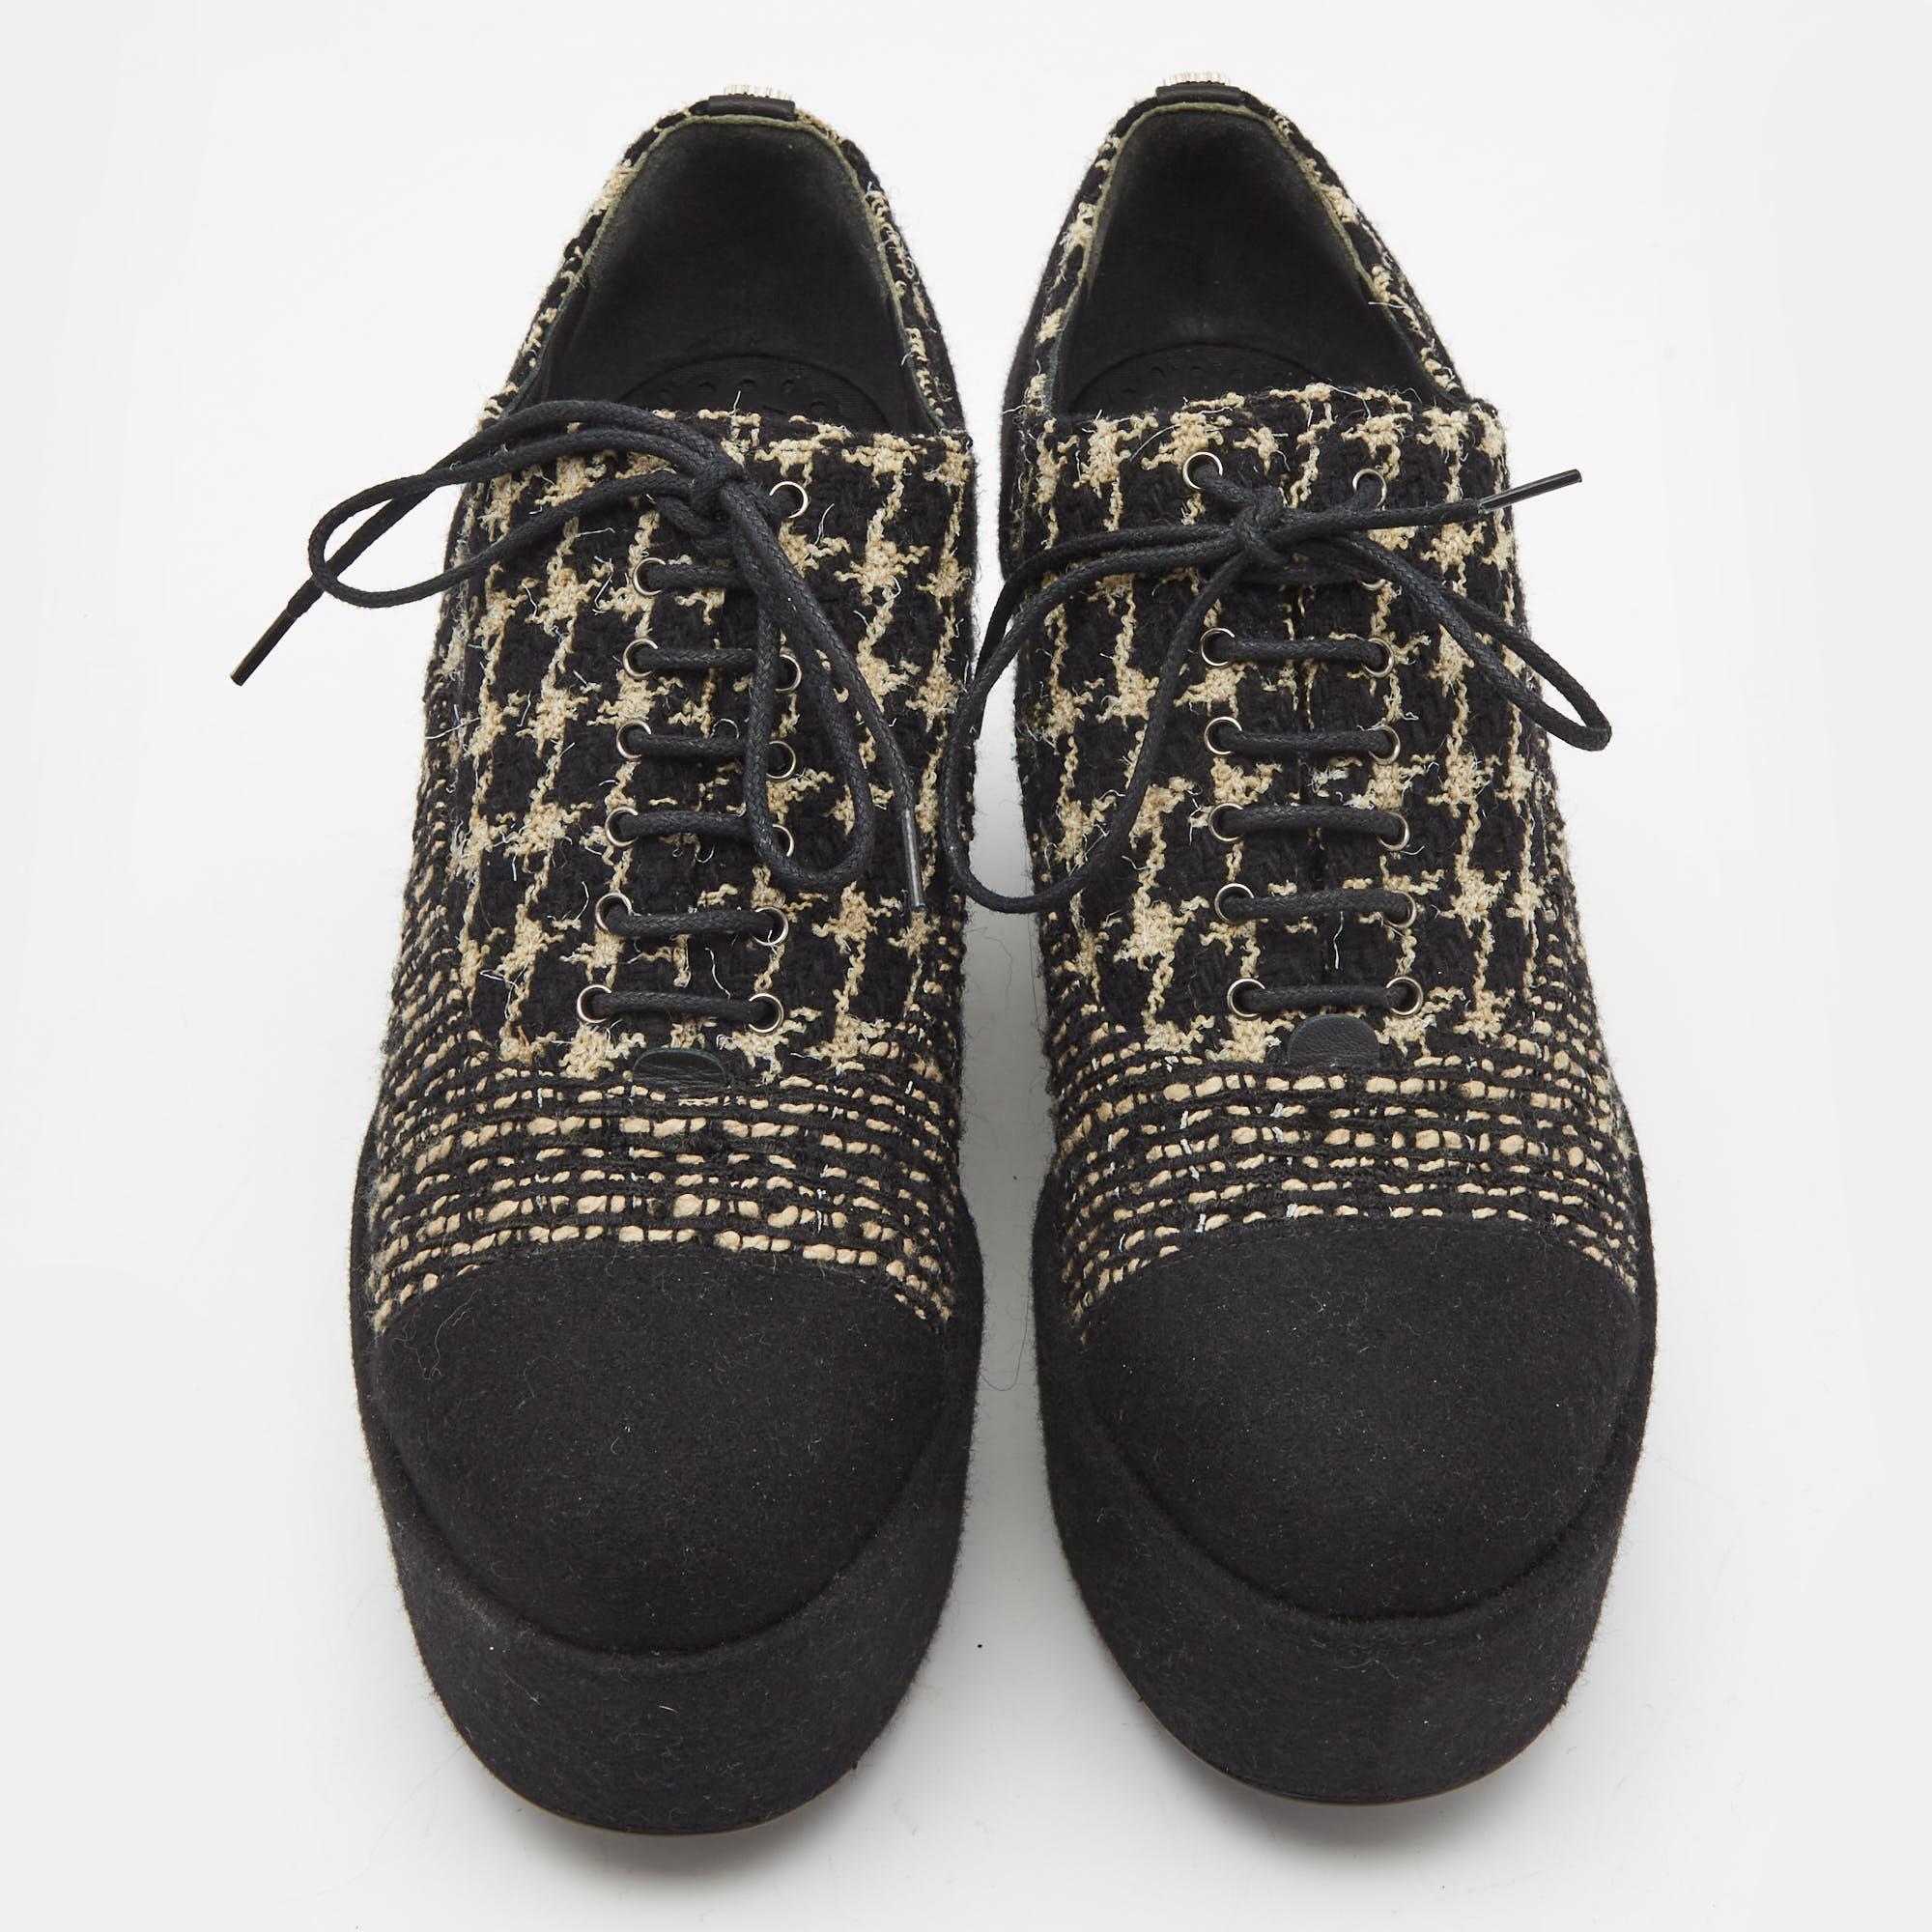 Offering a fine finish to your ensemble, this pair of Chanel oxfords symbolizes sophistication and comfort. They are made from tweed with lace-up closure on the upper and gold-tone hardware. The black and gold shade of this pair makes it a versatile